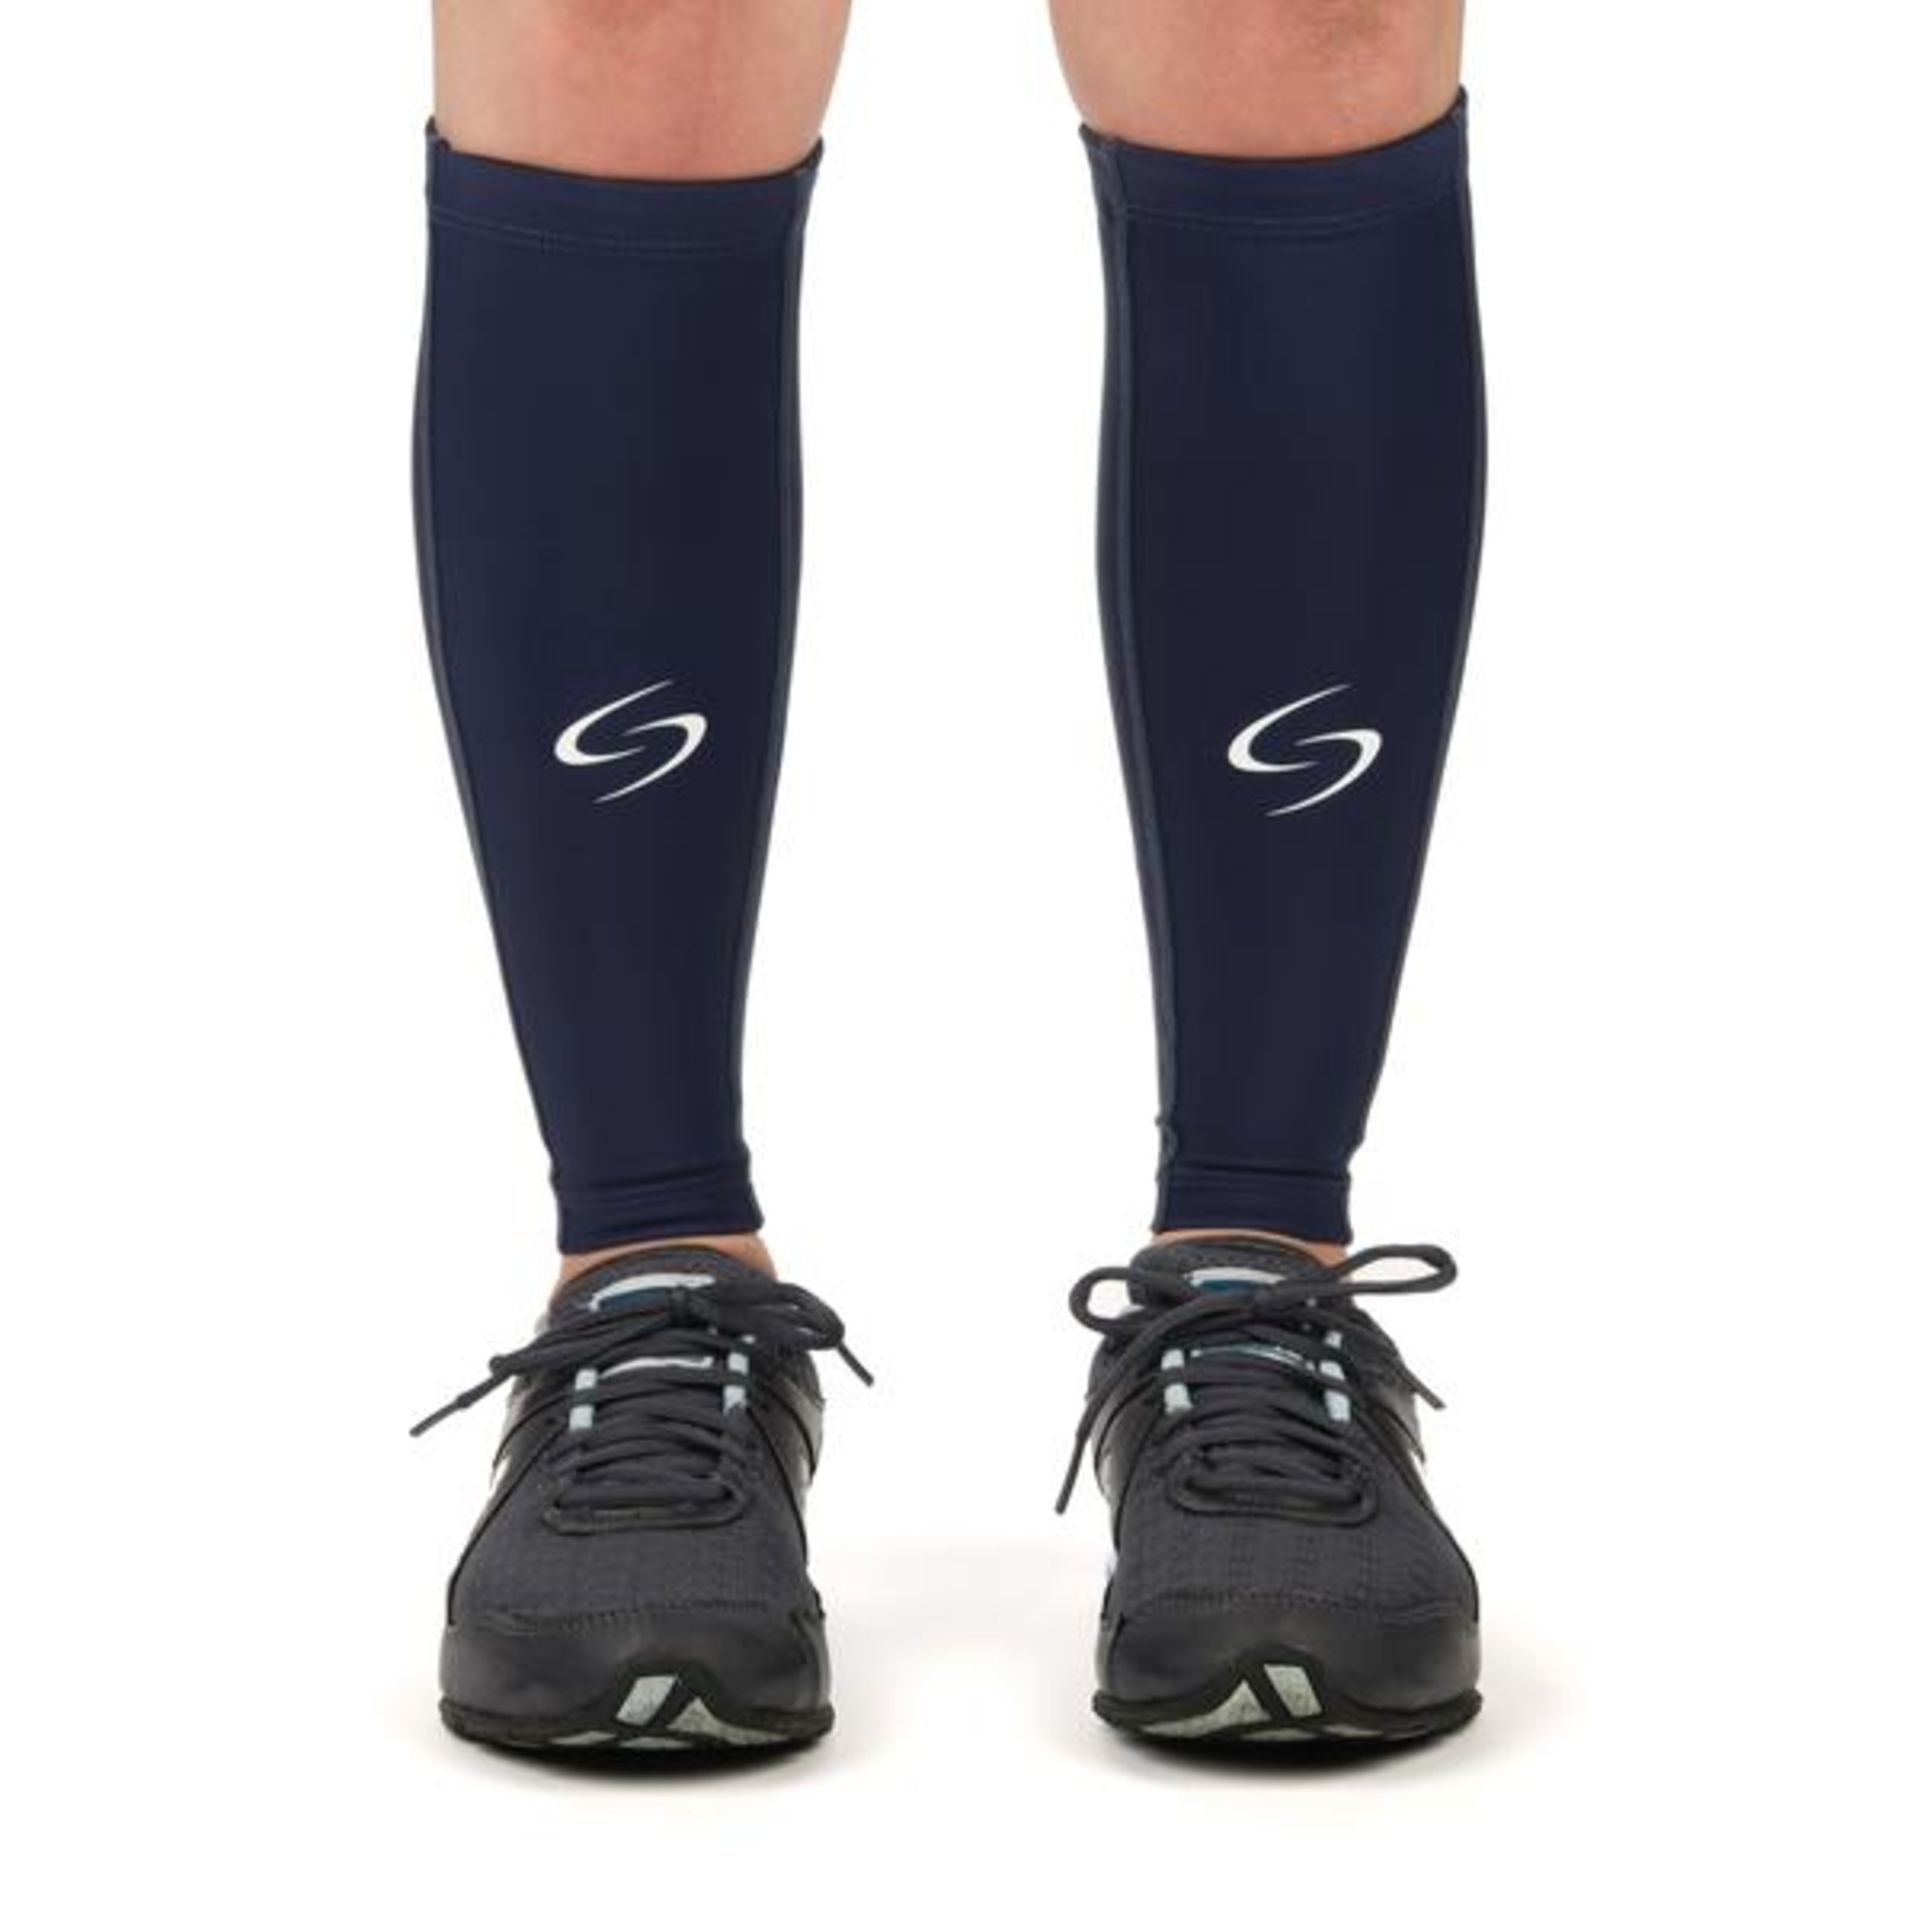 60 X BRAND NEW STARWOOD SPORTS BRANDED PAIRS OF CALF COMPRESSION SLEEVES - BLUE - MEDIUM - (PICK